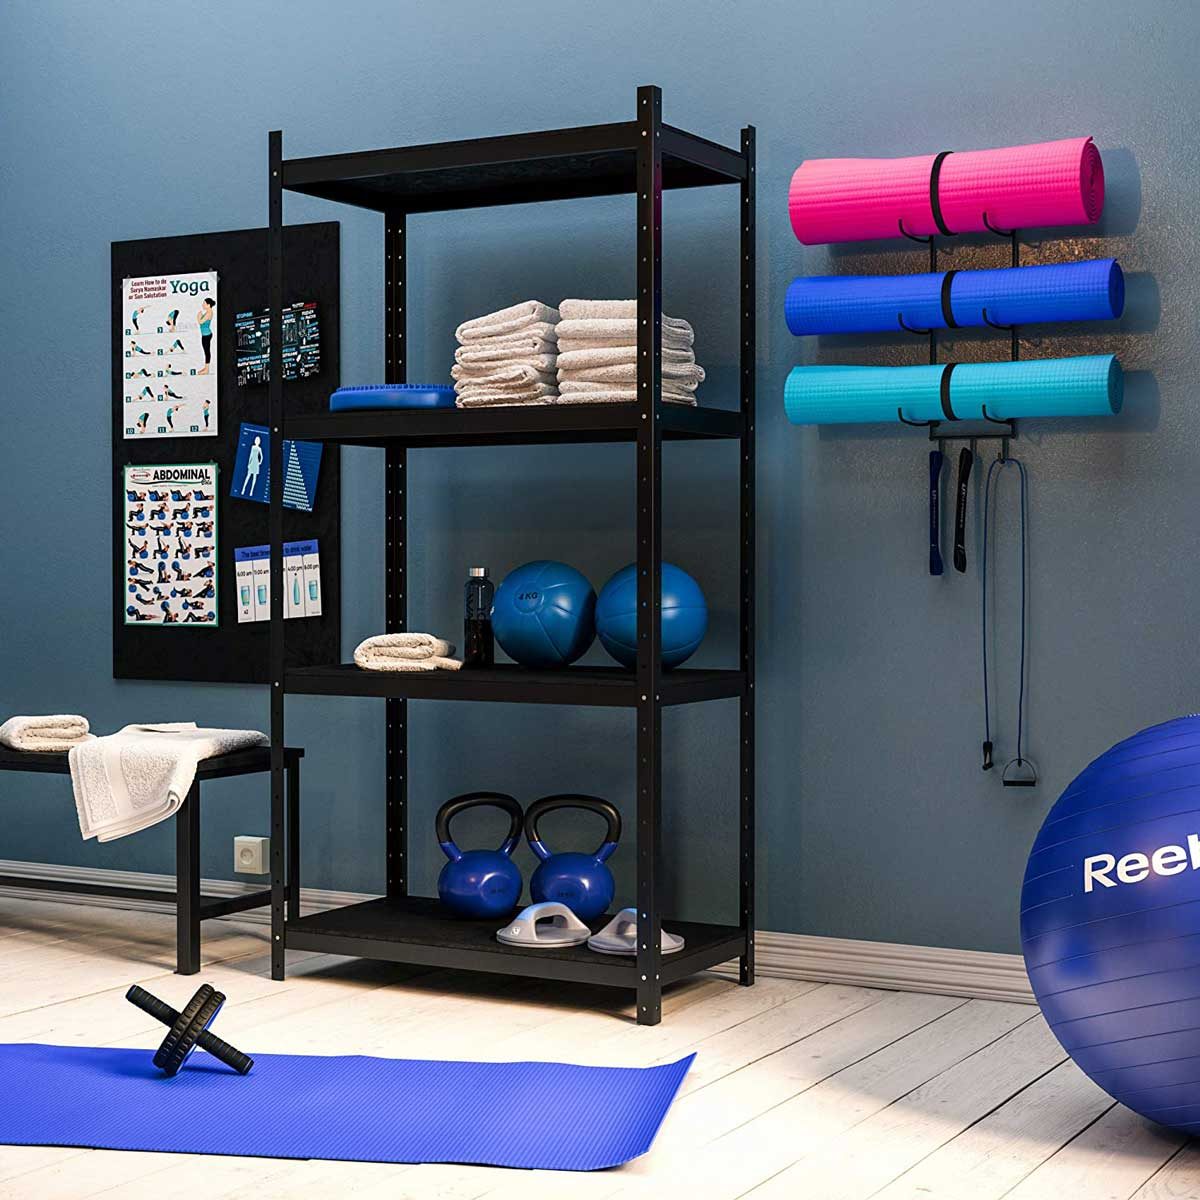 Gym Storage,Wall Mount Hanging Organizer,Multi-Purpose Workout Gear Wall Rack Hanger for Home and Pro Gym Storage,for Exercise Bands Lifting Belts Chains Gym Rack Organizer Jump Ropes 